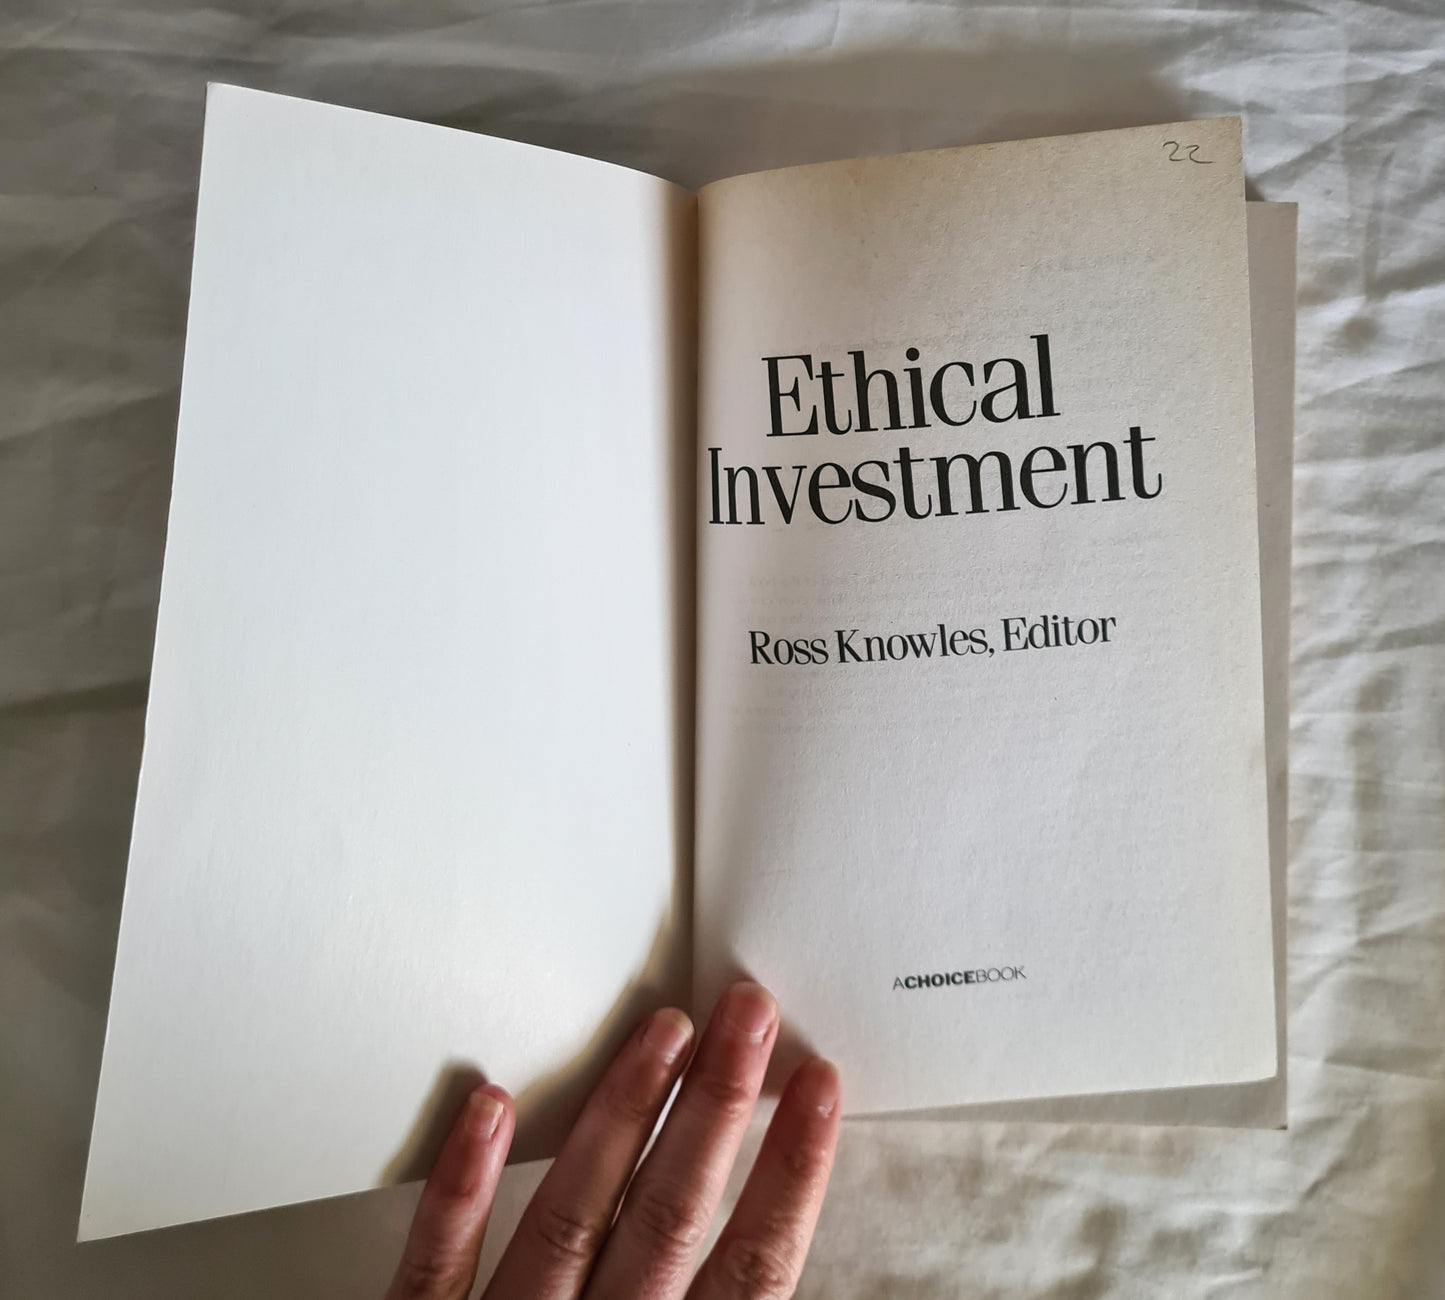 Ethical Investment by Ross Knowles